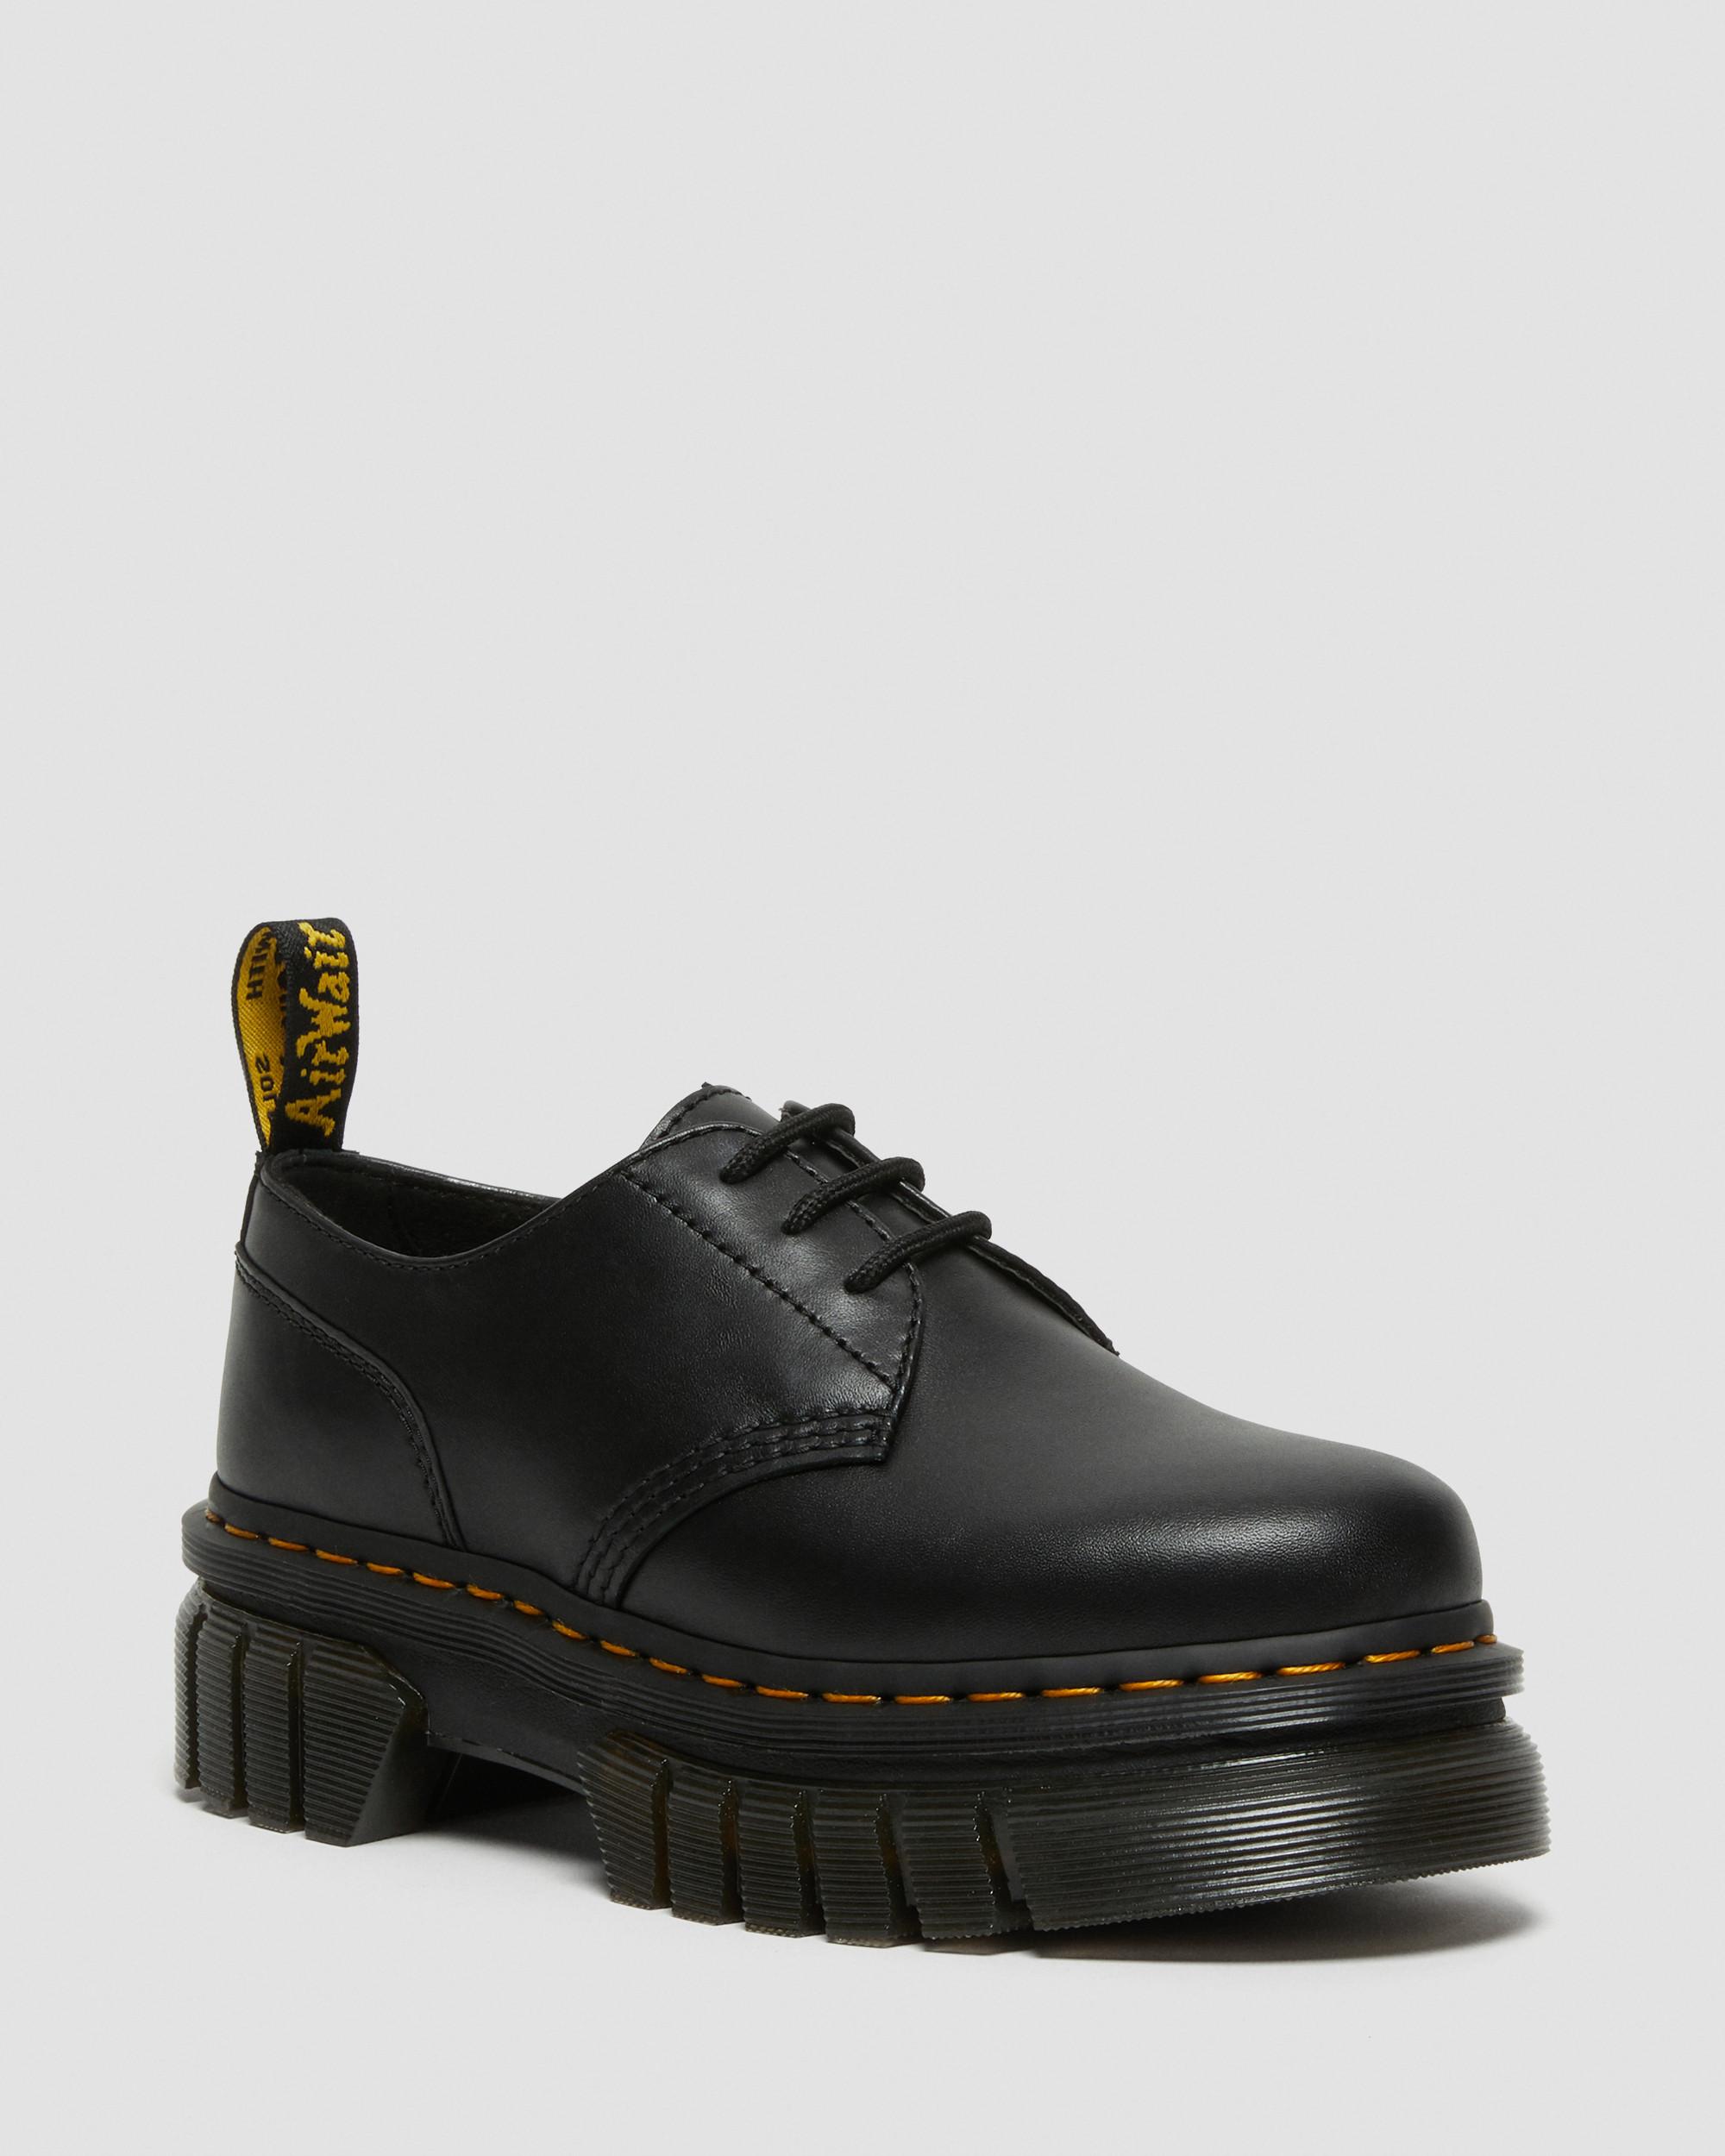 Audrick Nappa Leather Platform Shoes in Black